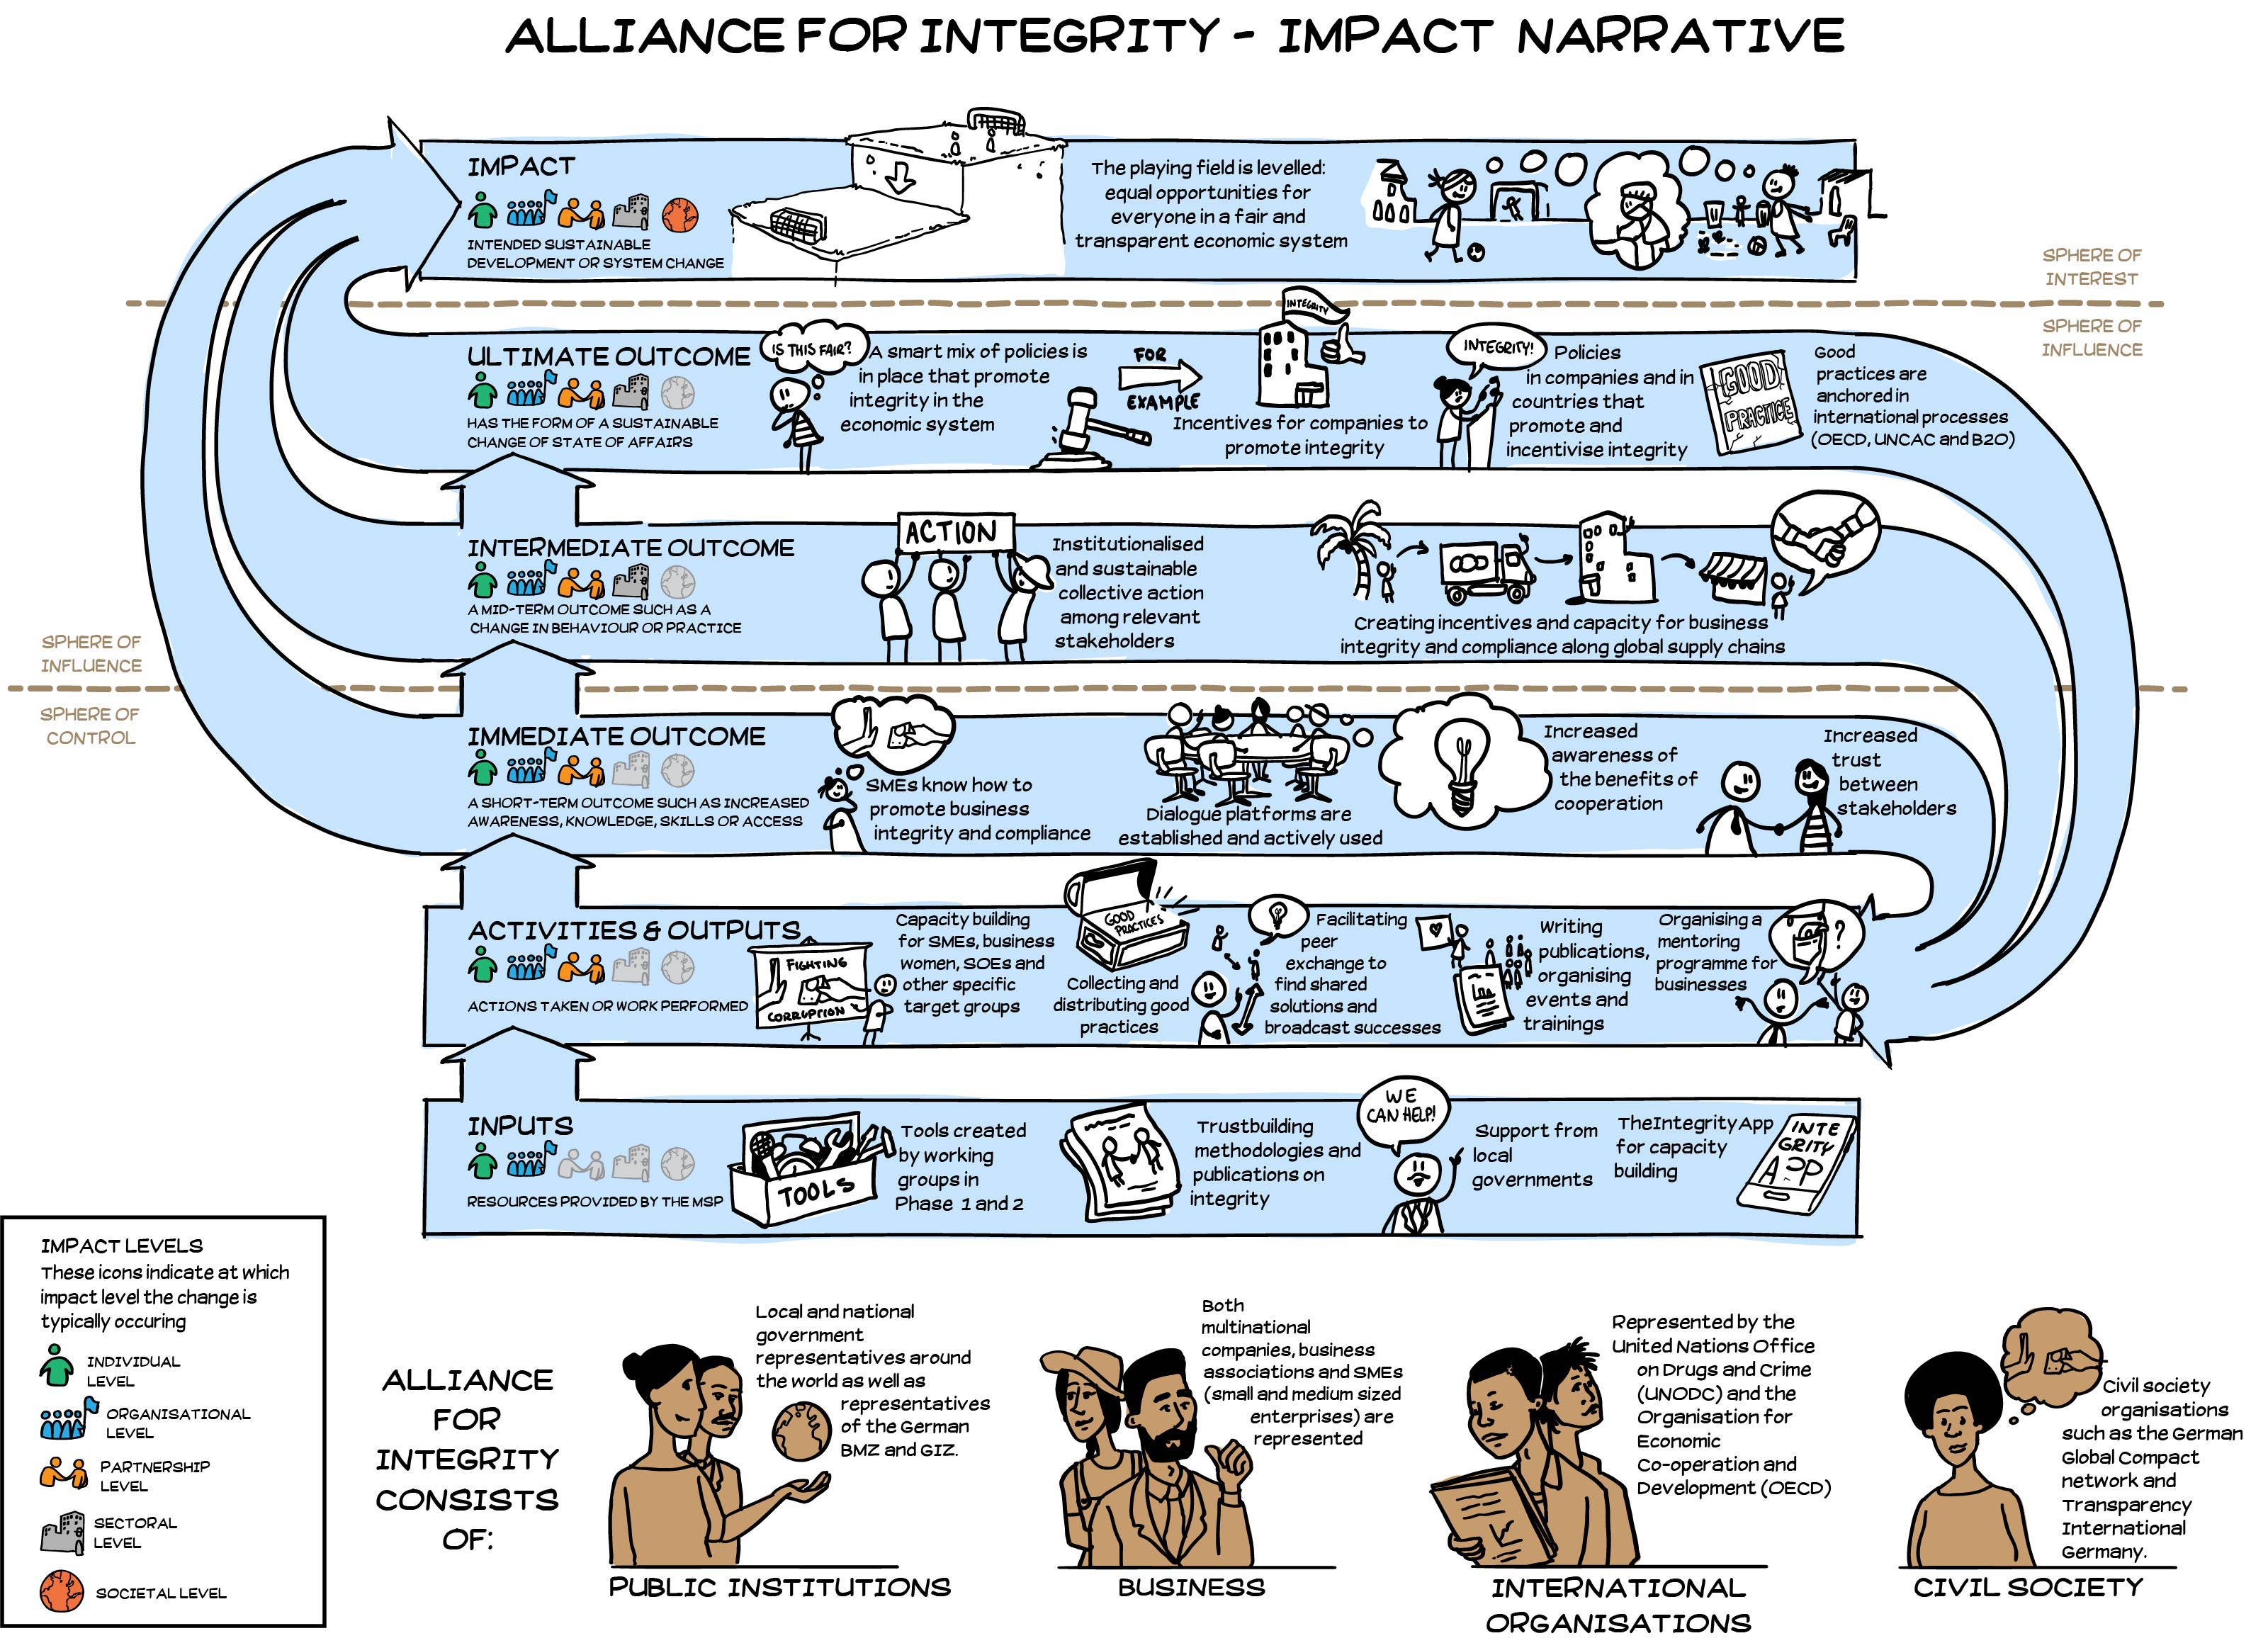 Alliance for Integrity - Impact Narrative English